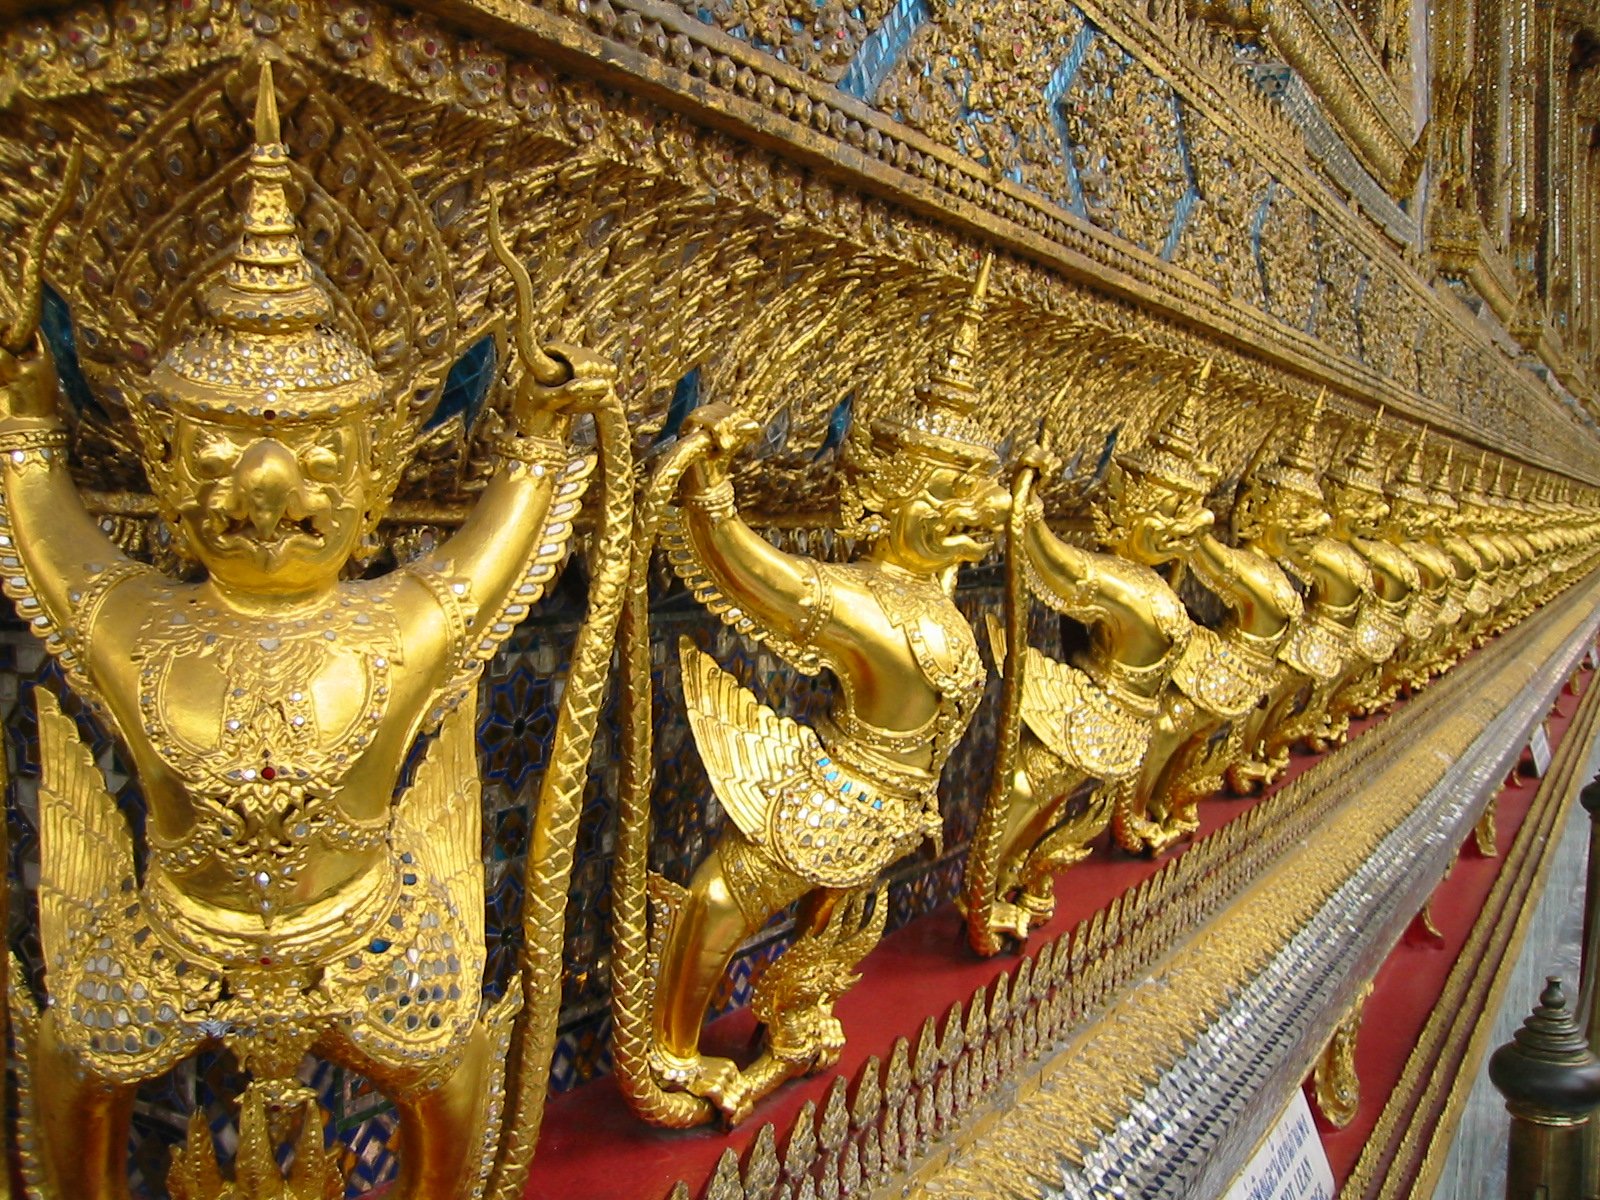 a lot of gilded gold statues with different designs on them